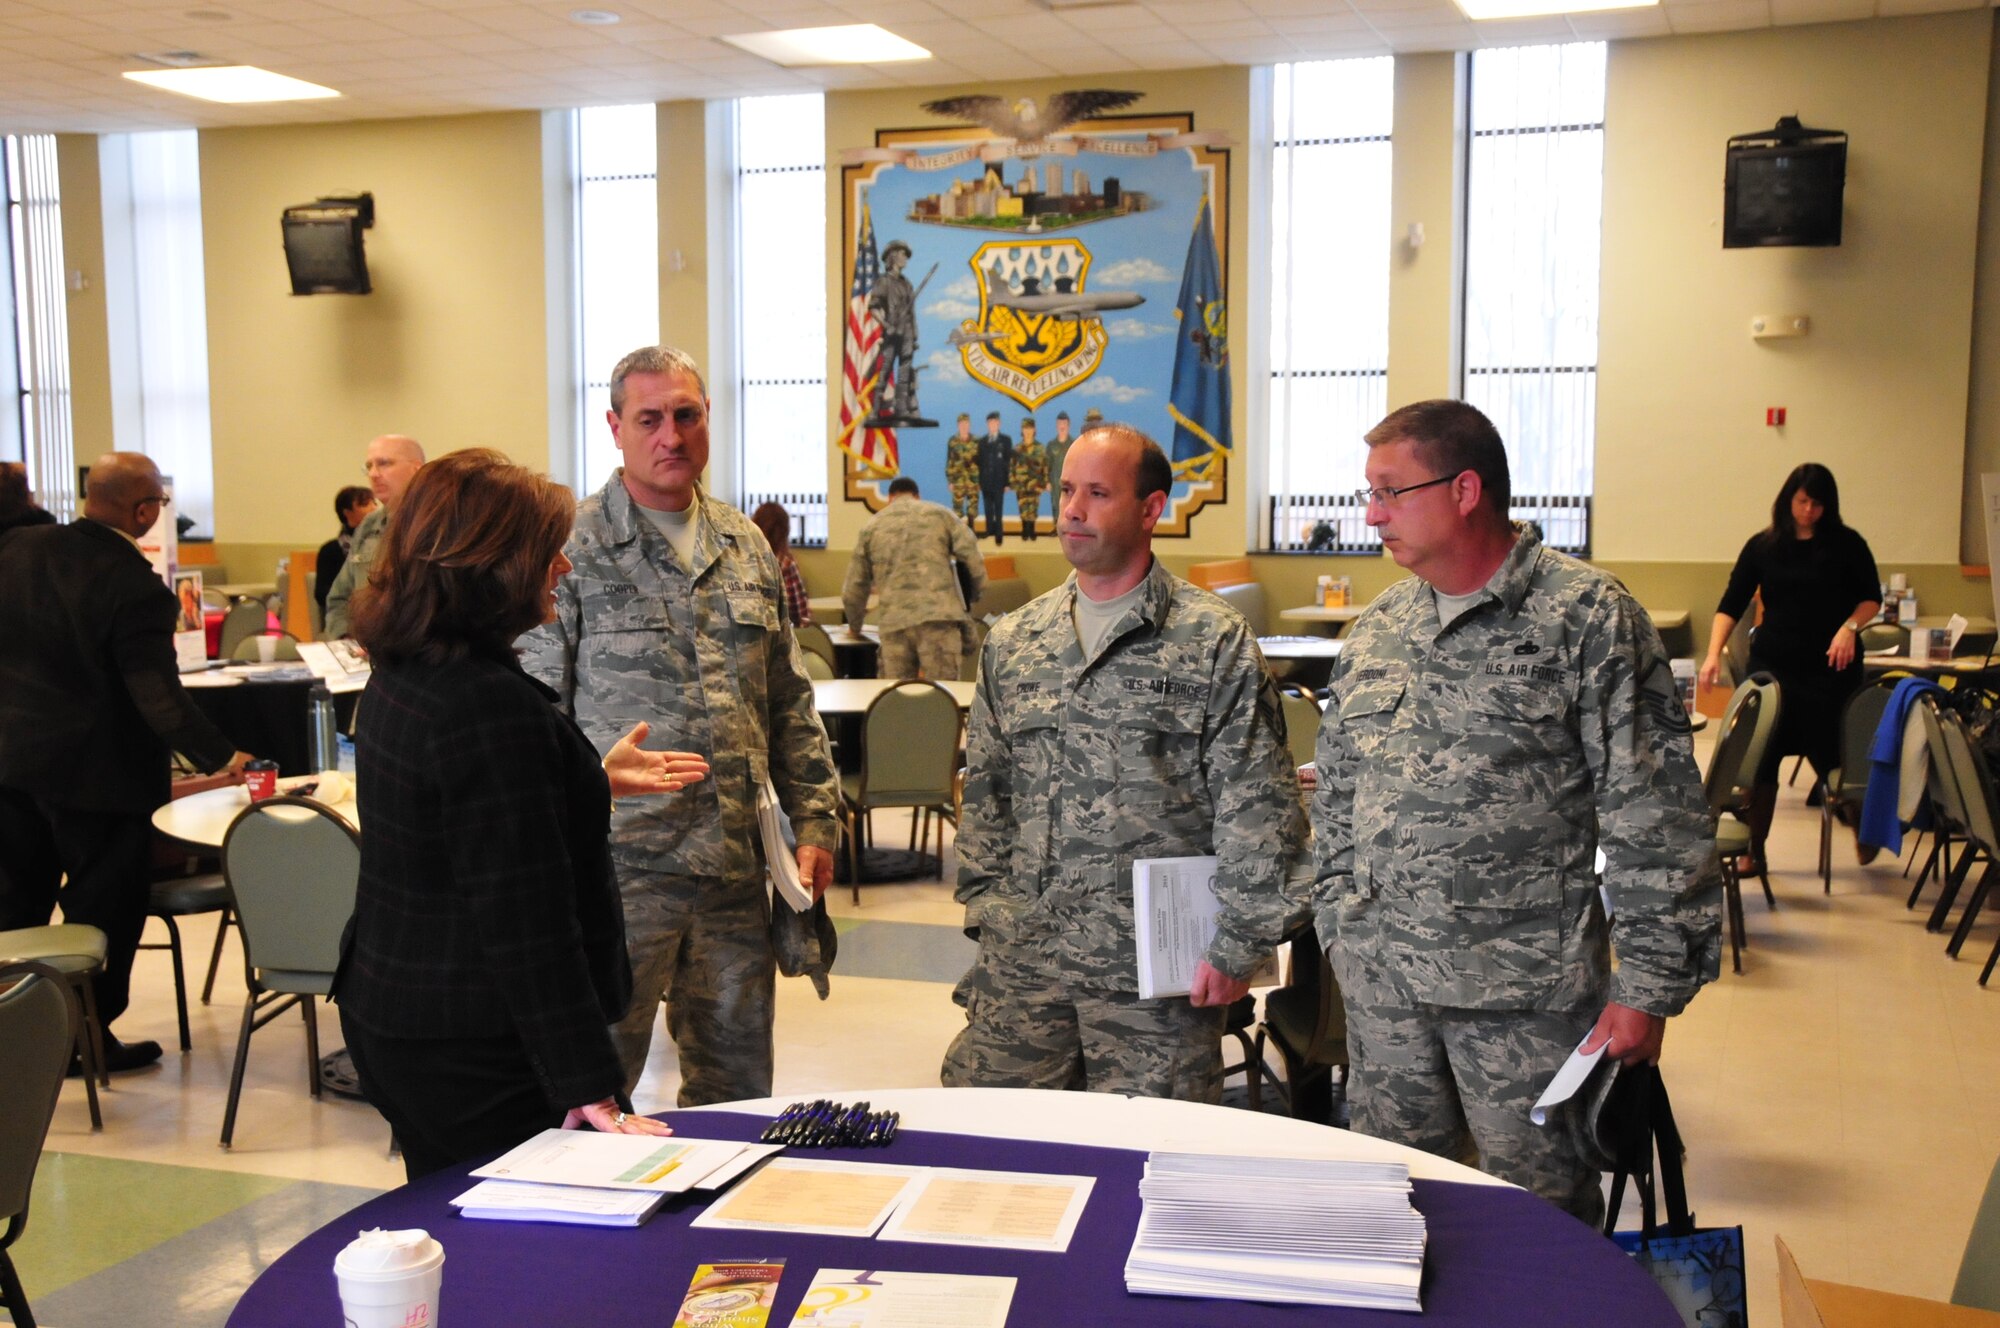 The annual Open Season Health Care Benefits Fair was held at the 171st Air Refueling Wing in the dining facility on November 5, 2013.  Eight health care vendors and two financial planning vendors were present at the fair, giving service members an opportunity to explore and discuss benefits available to them. (U.S. Air National Guard Photo by Airman Allyson L. Manners/Released)